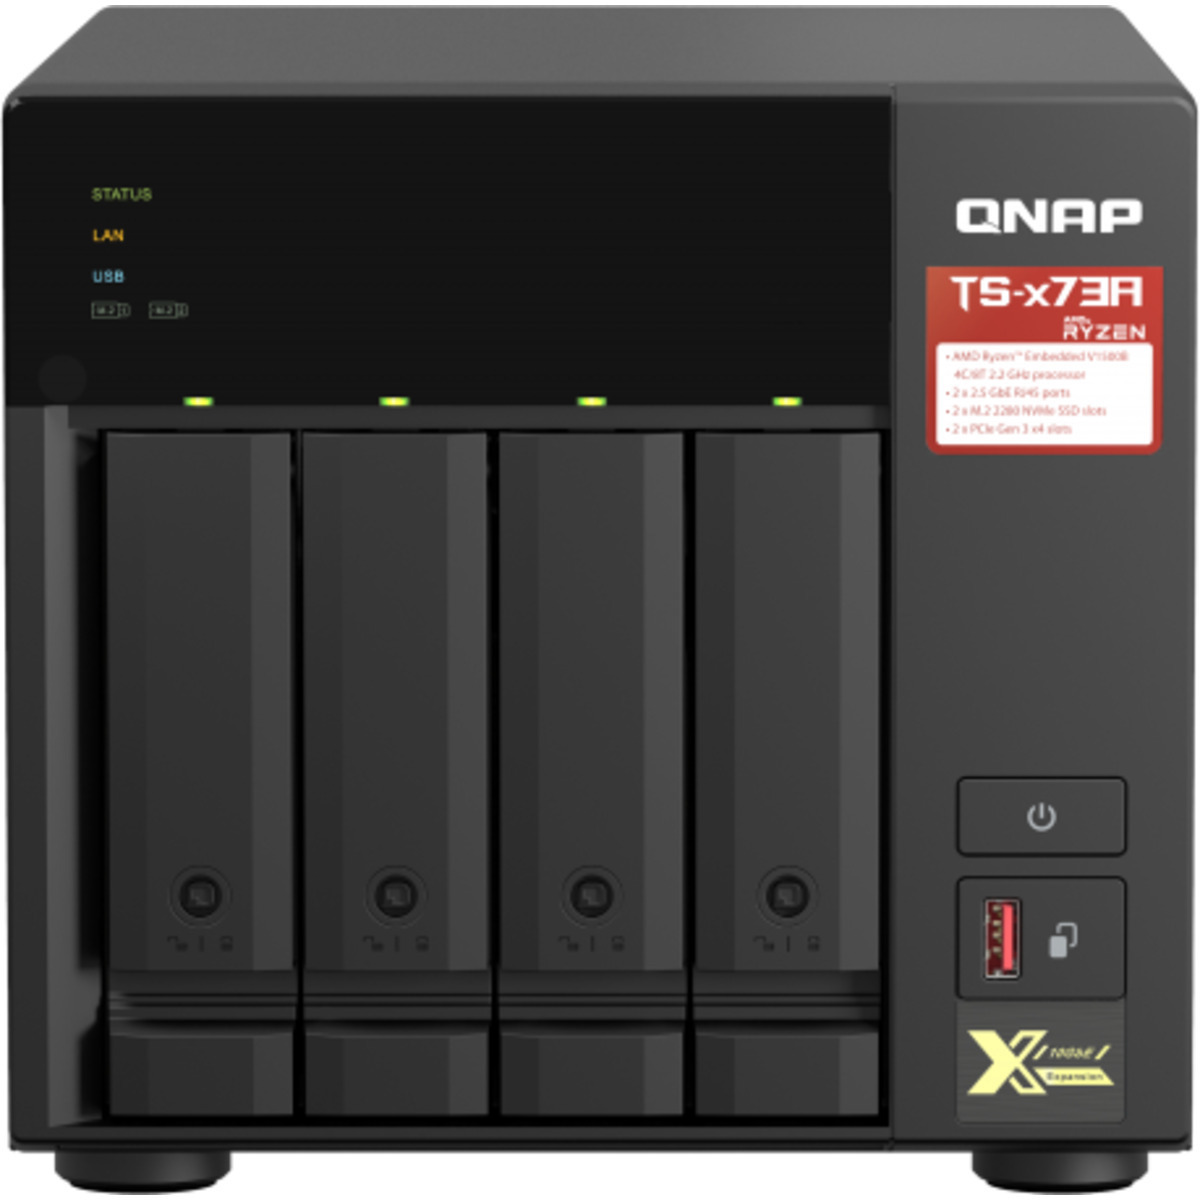 QNAP TS-473A 6tb 4-Bay Desktop Multimedia / Power User / Business NAS - Network Attached Storage Device 3x2tb Sandisk Ultra 3D SDSSDH3-2T00 2.5 560/520MB/s SATA 6Gb/s SSD CONSUMER Class Drives Installed - Burn-In Tested TS-473A